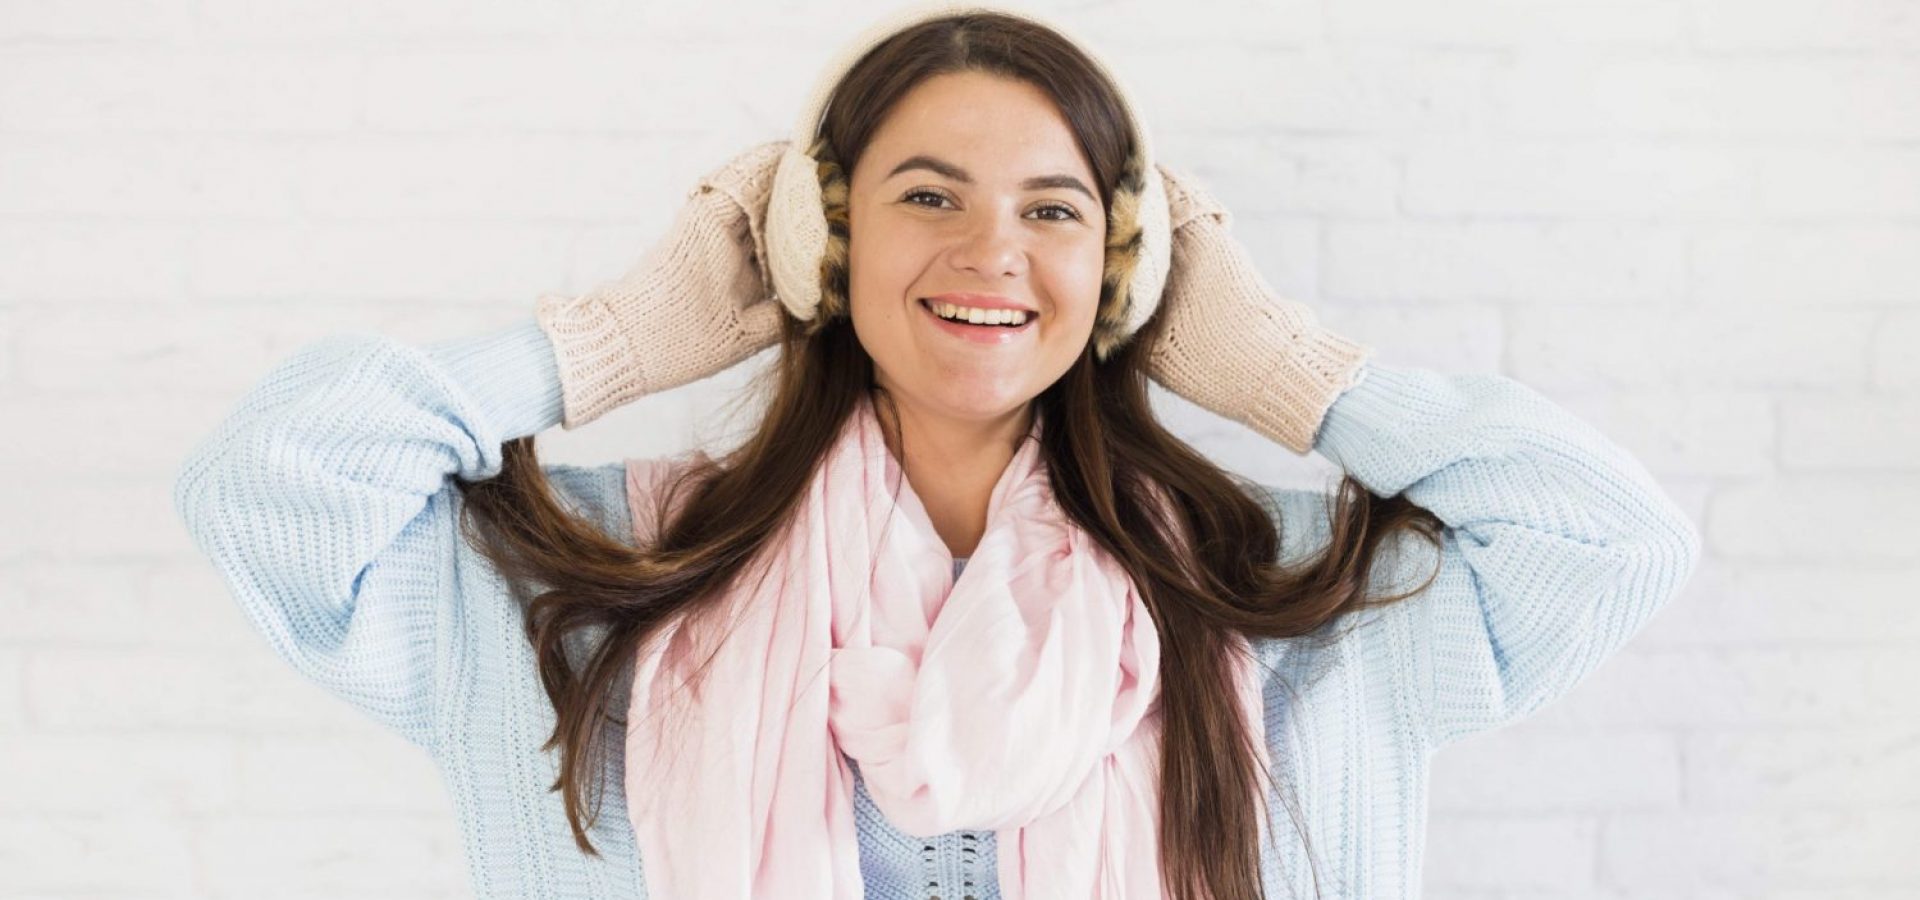 Smiling lady in mittens, earmuffs and scarf Free Photo